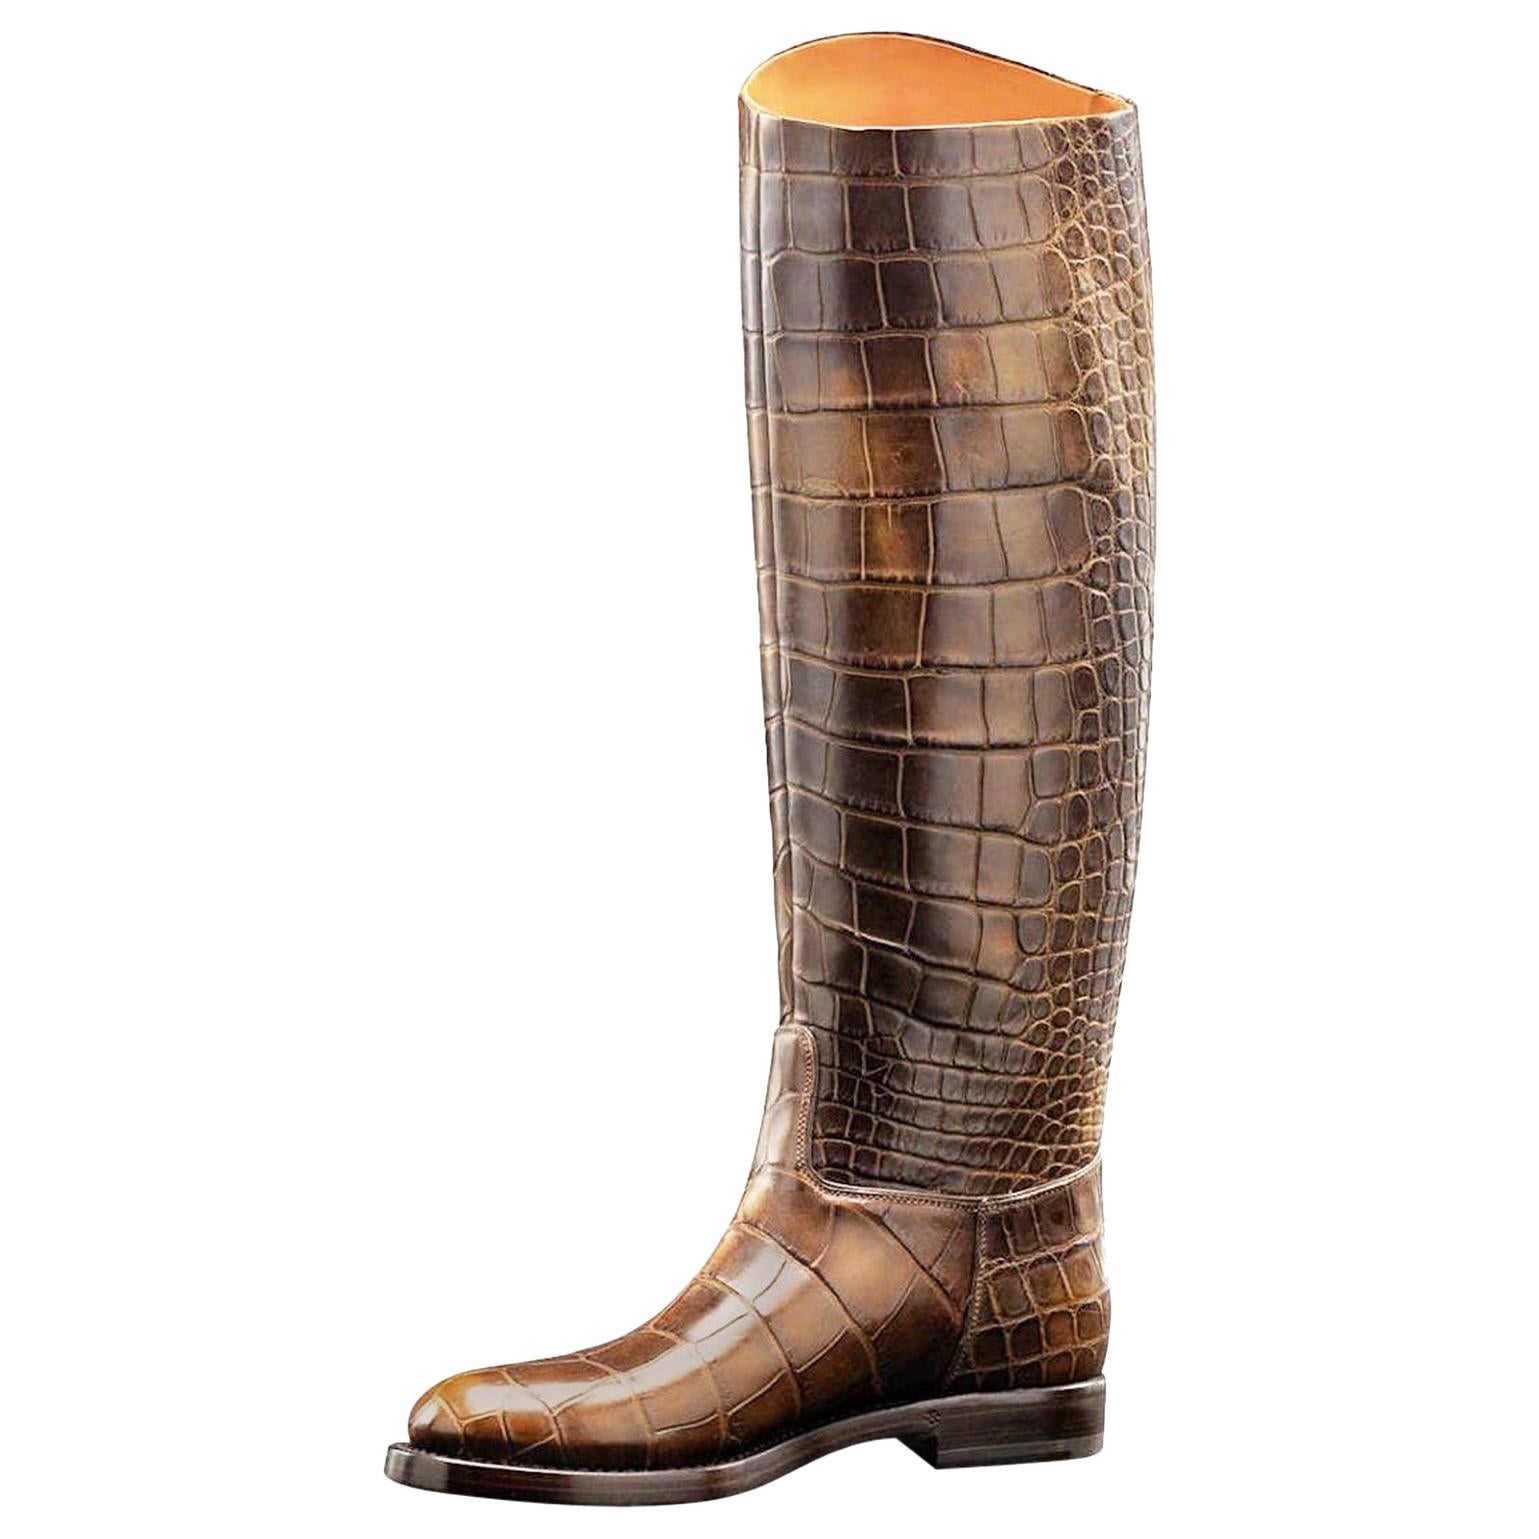 NEW Gucci Exotic Crocodile Skin 1921 Collection Crest Riding Style Boots